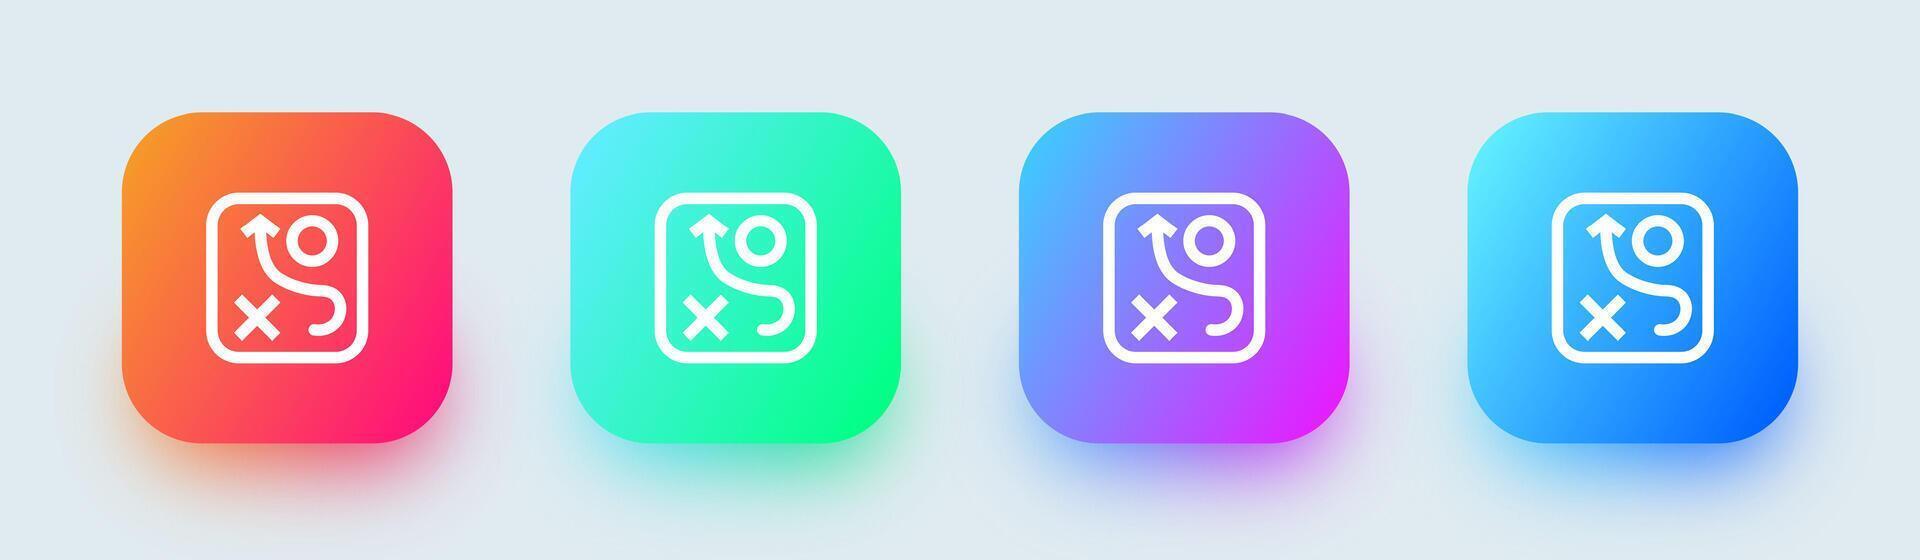 Strategy line icon in square gradient colors. Plan signs vector illustration.